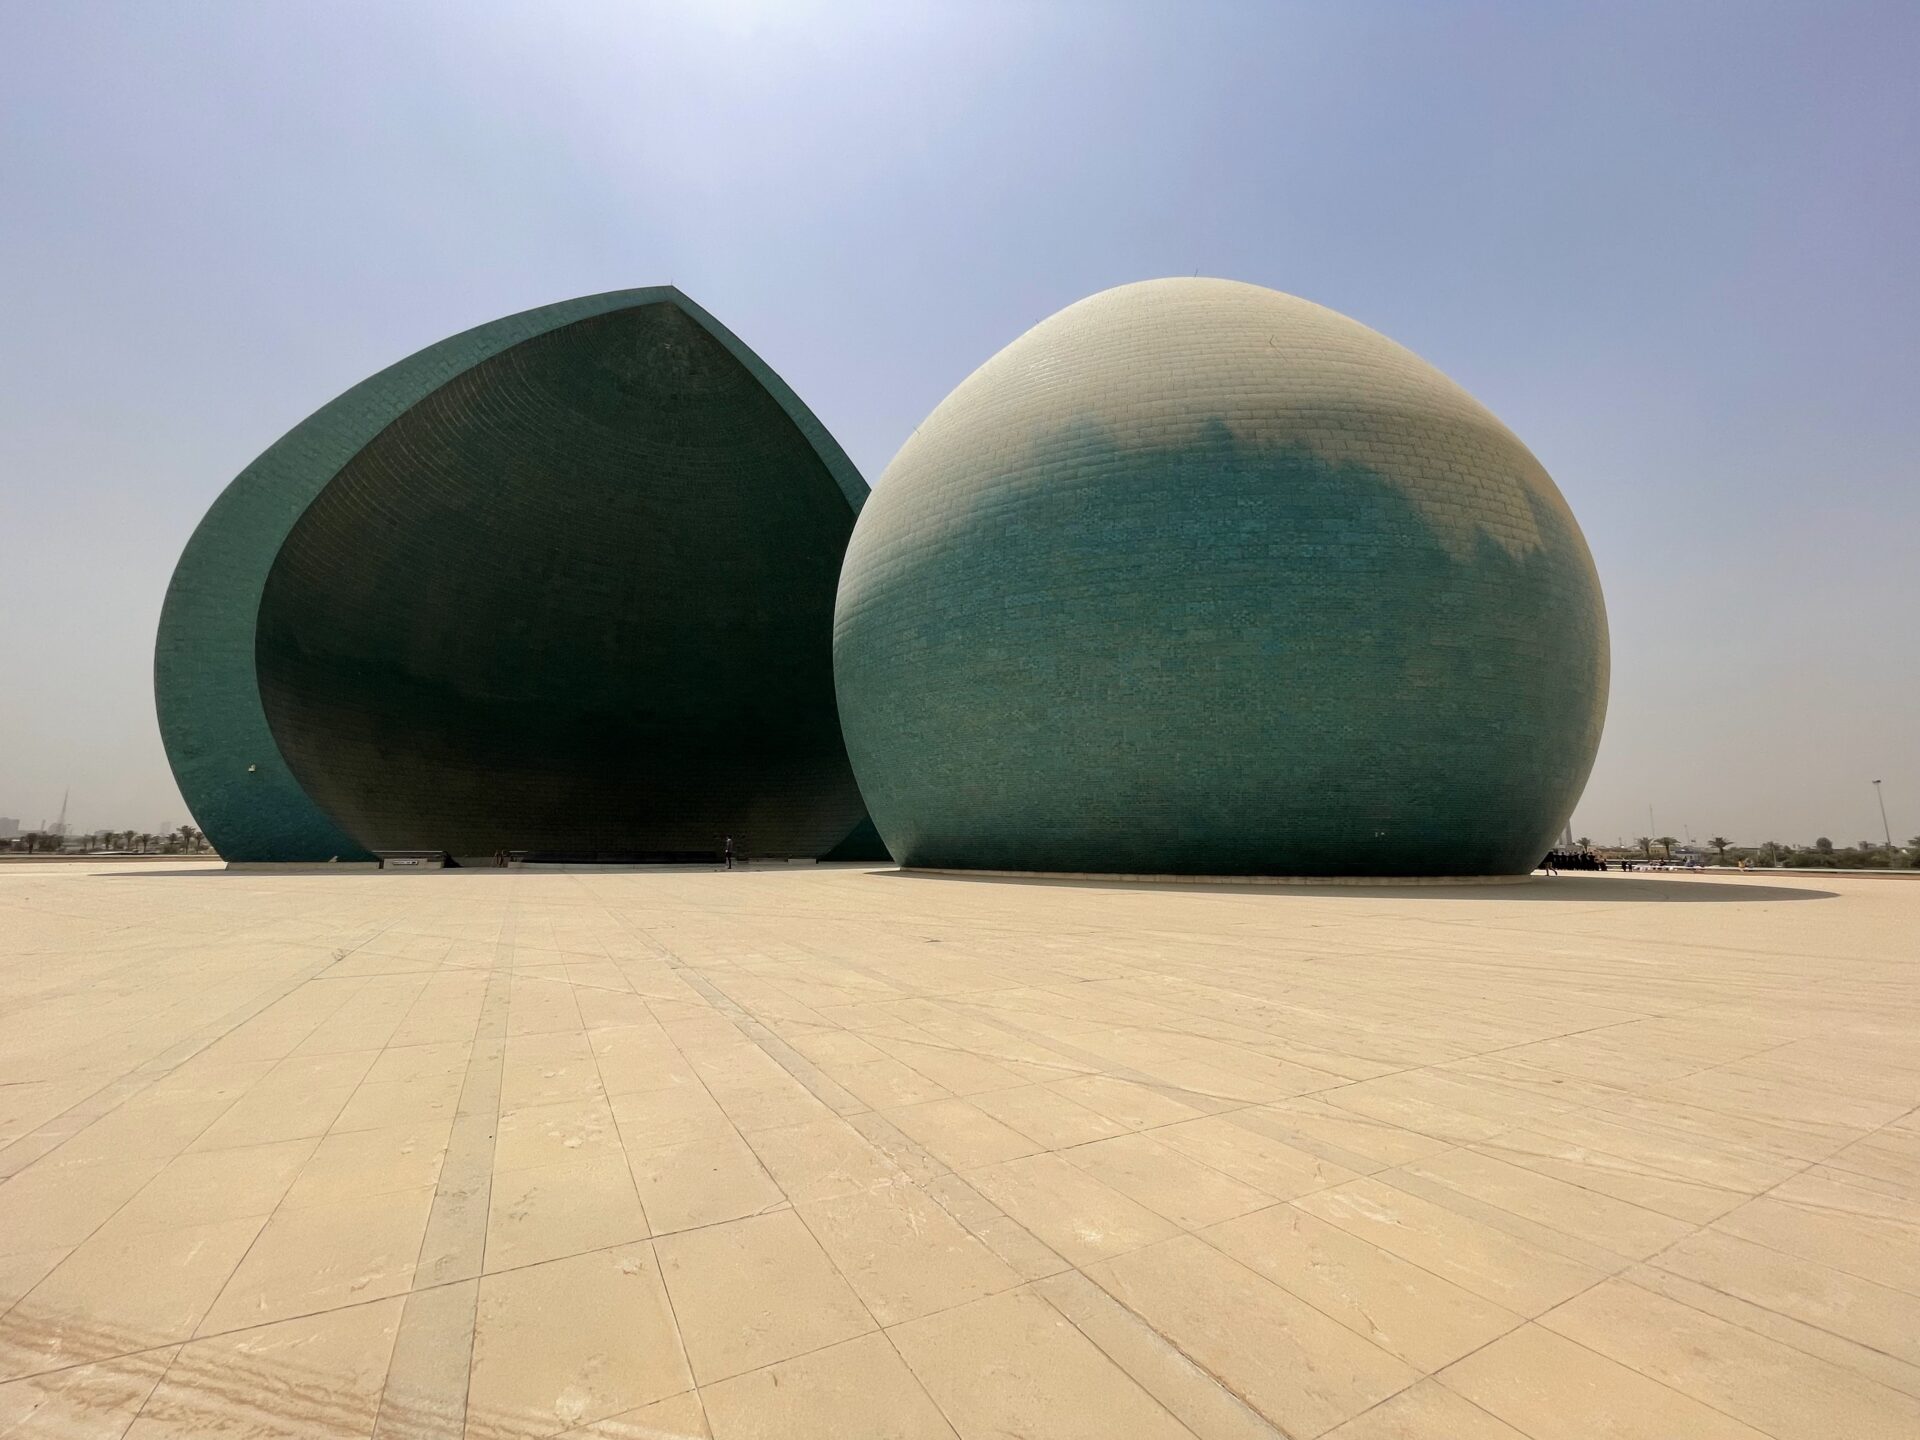 two large round buildings in a desert